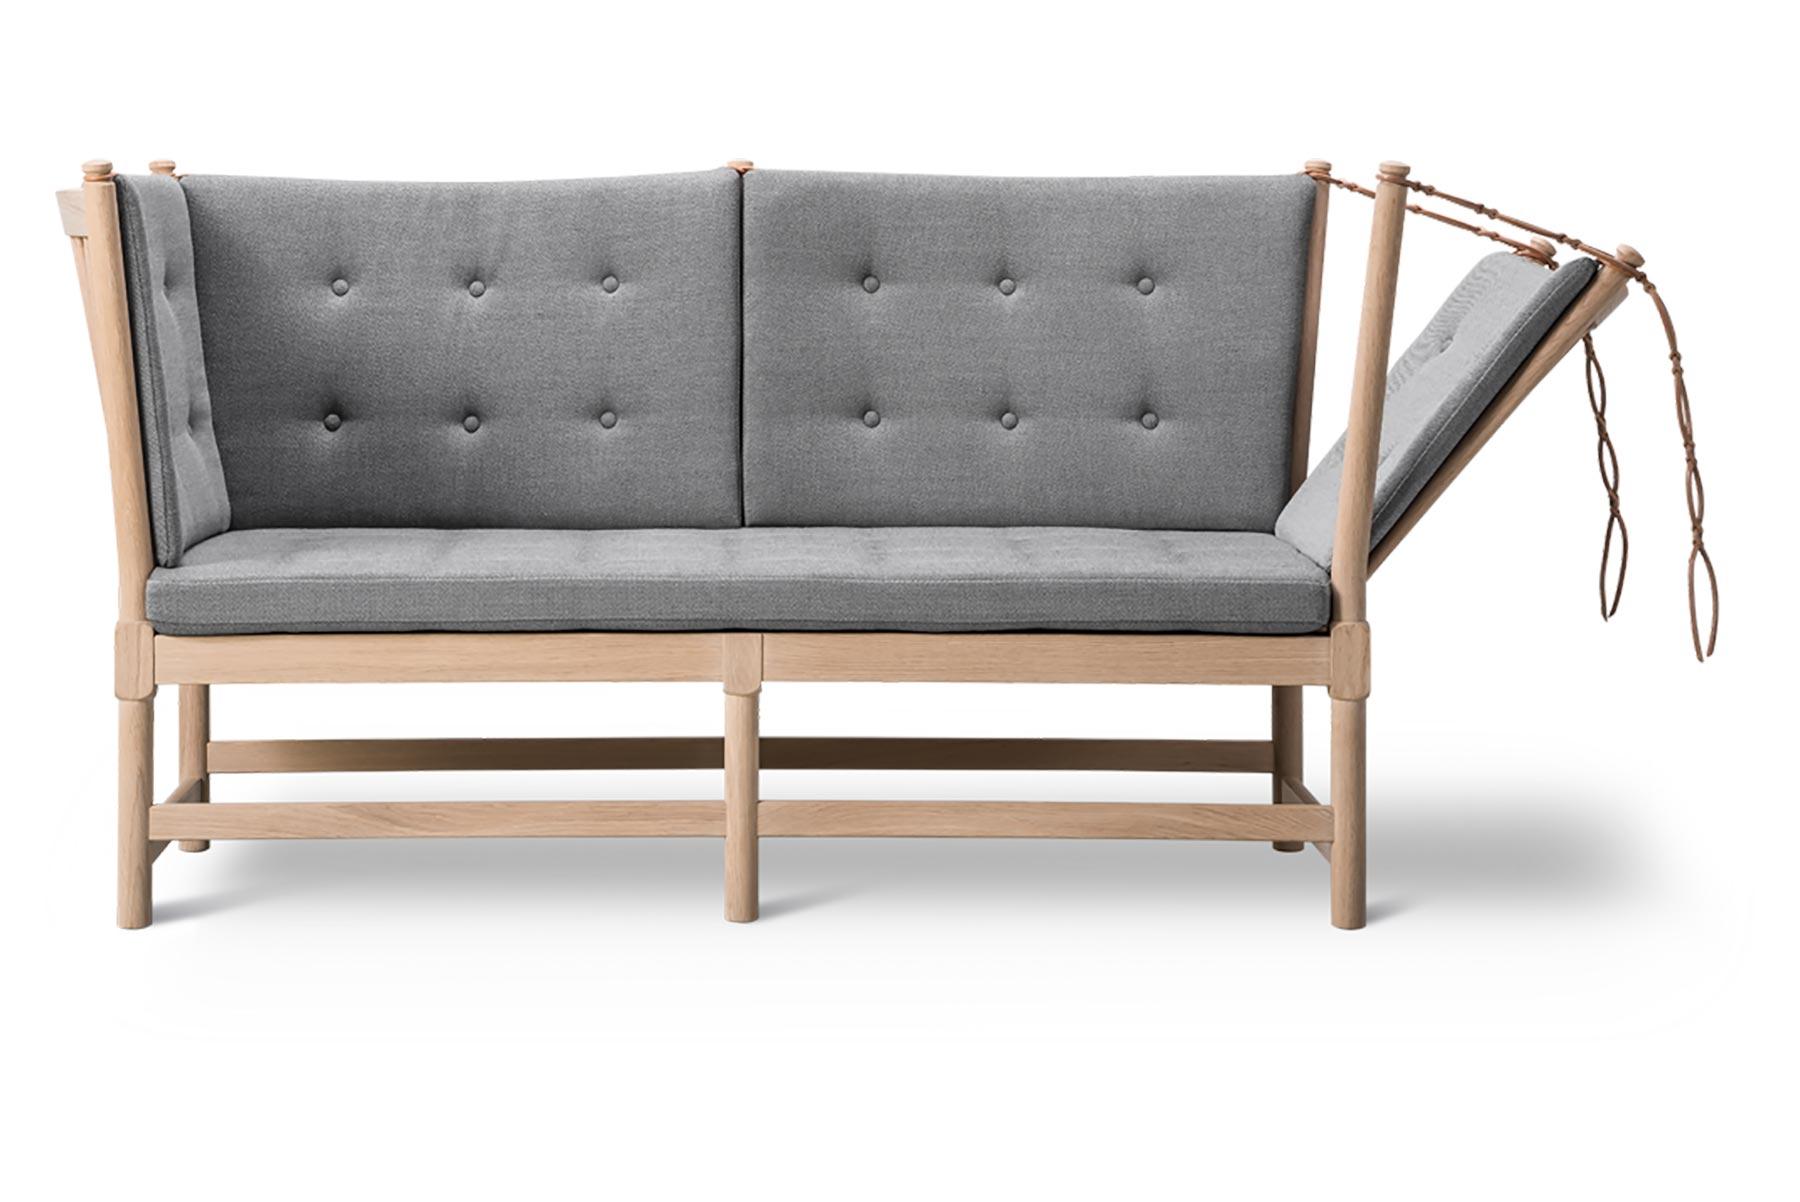 Mogensen designed the spoke back sofa in 1945 as a daybed and chaise lounge hybrid, with a hinged side. The exposed construction was too sophisticated for modest post-war culture and the sofa did not go into production until 1962.

Available